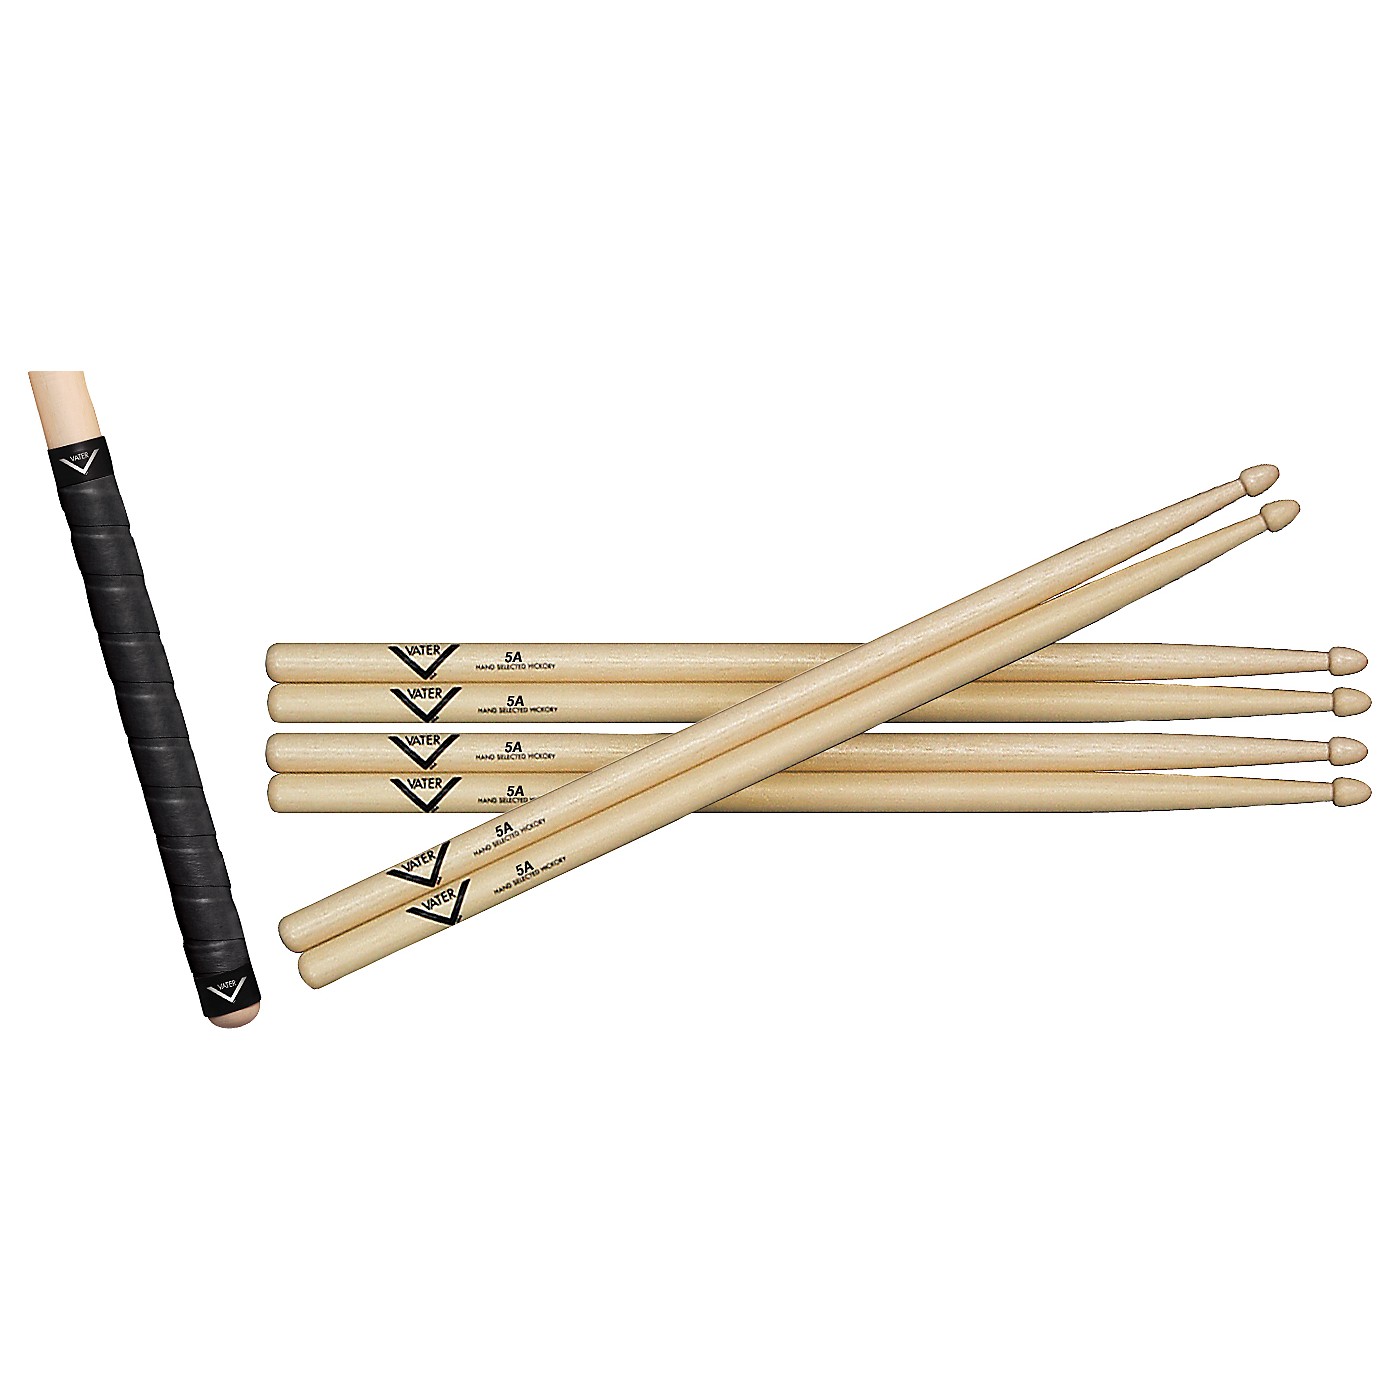 Vater Buy 3 Pairs of Hickory Sticks, Get a Free Pair of Sticks and Free Grip Tape thumbnail